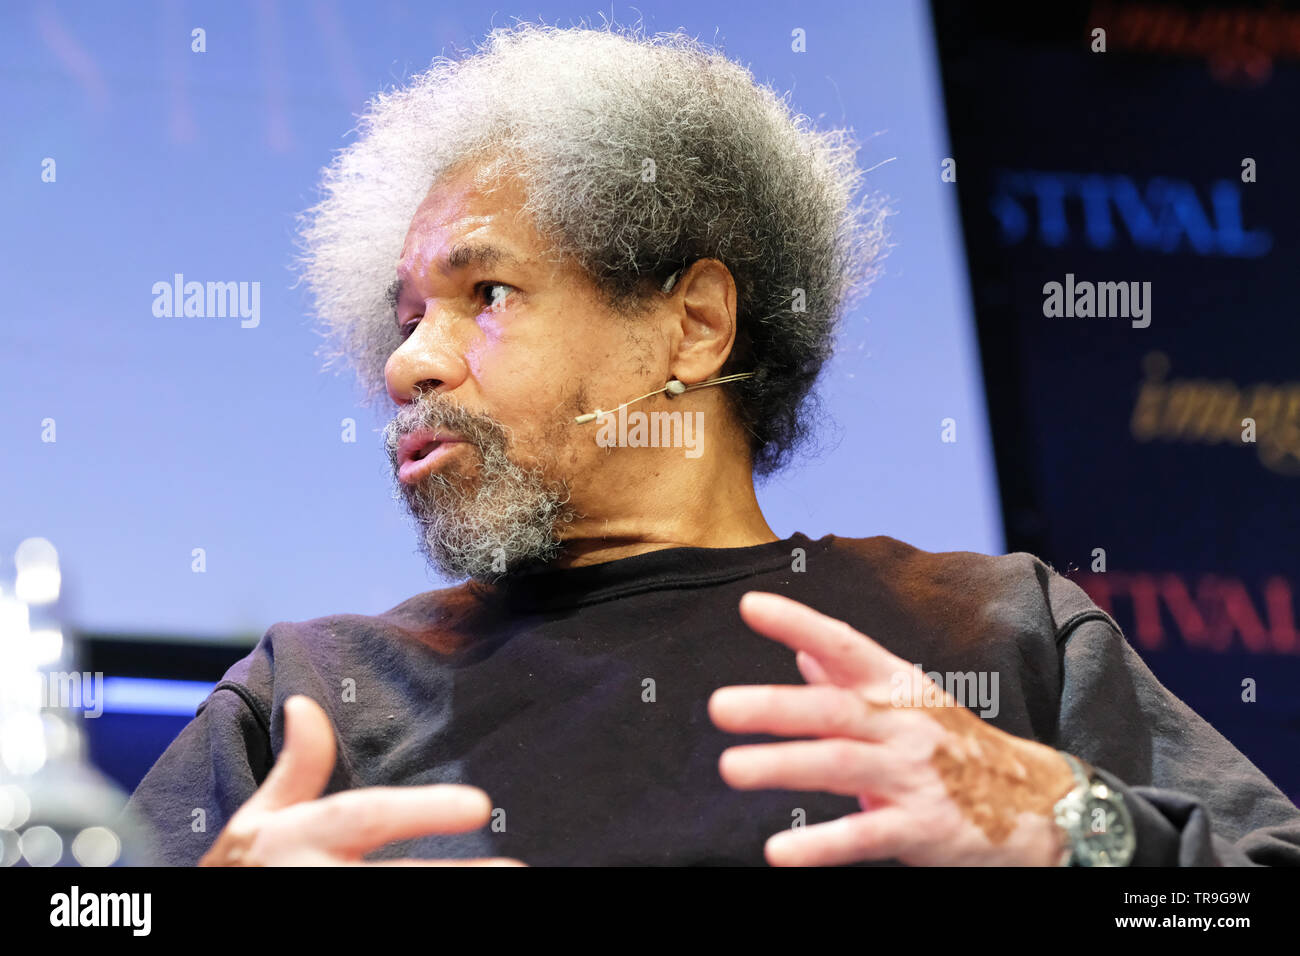 Hay Festival, Hay on Wye, Powys, Wales, UK - Friday 31st May 2019 - Albert Woodfox on stage at the Hay Festival talking about his book Solitary which tells of his many decades in solitary confinement for a crime he did not commit. The eleven day Festival features over 800 events - the Hay Festival continues to Sunday 2nd June. Photo Steven May / Alamy Live News Stock Photo